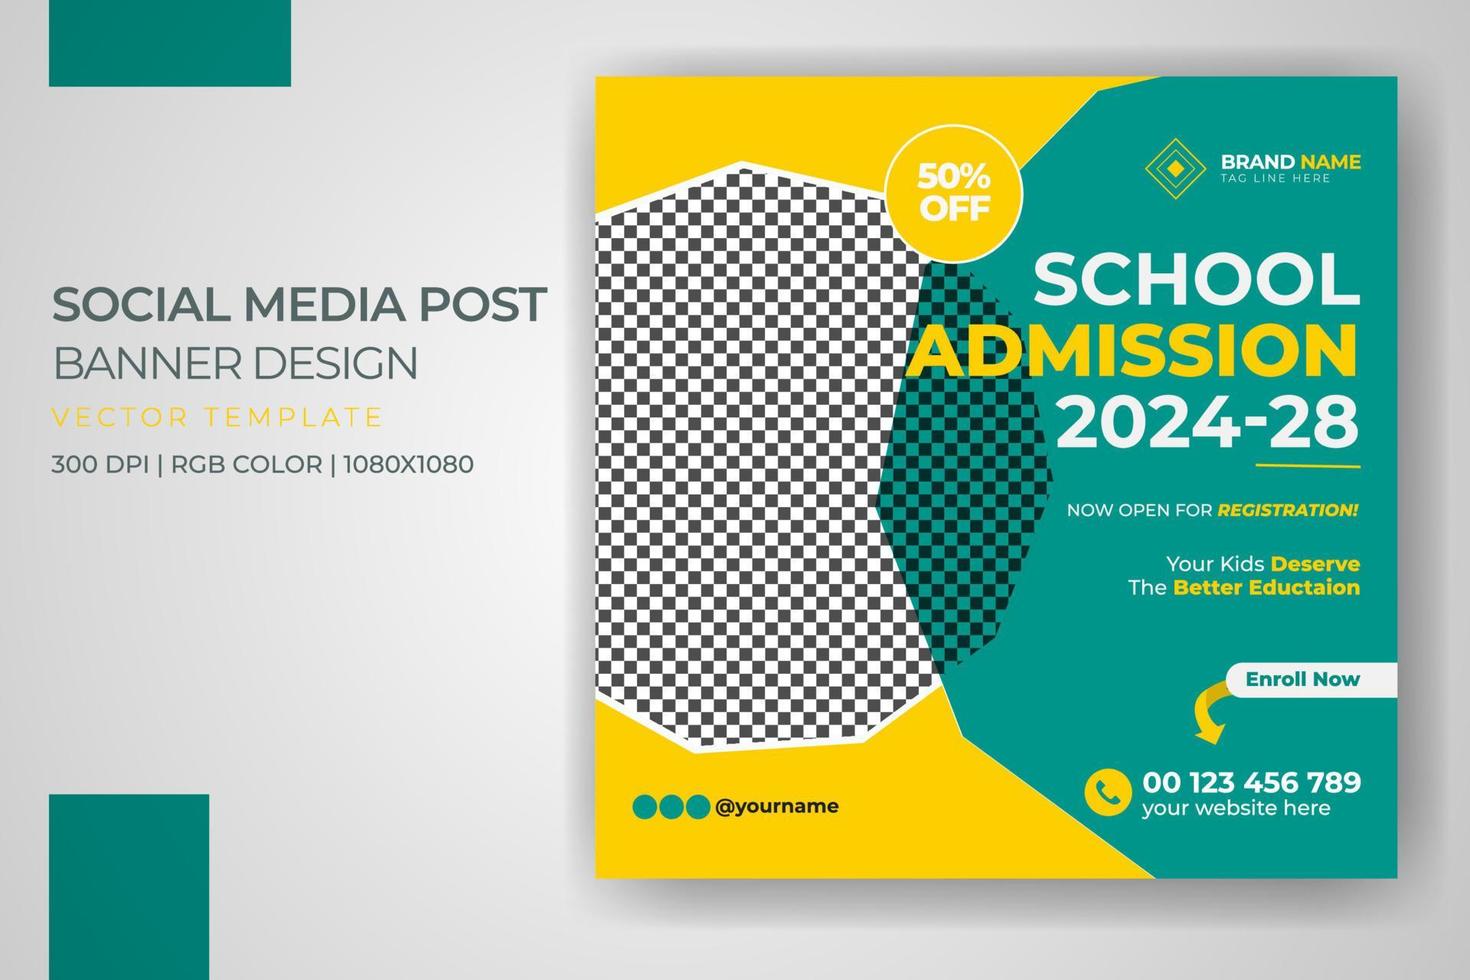 Back to school admission banner world education day social media post vector template design free download